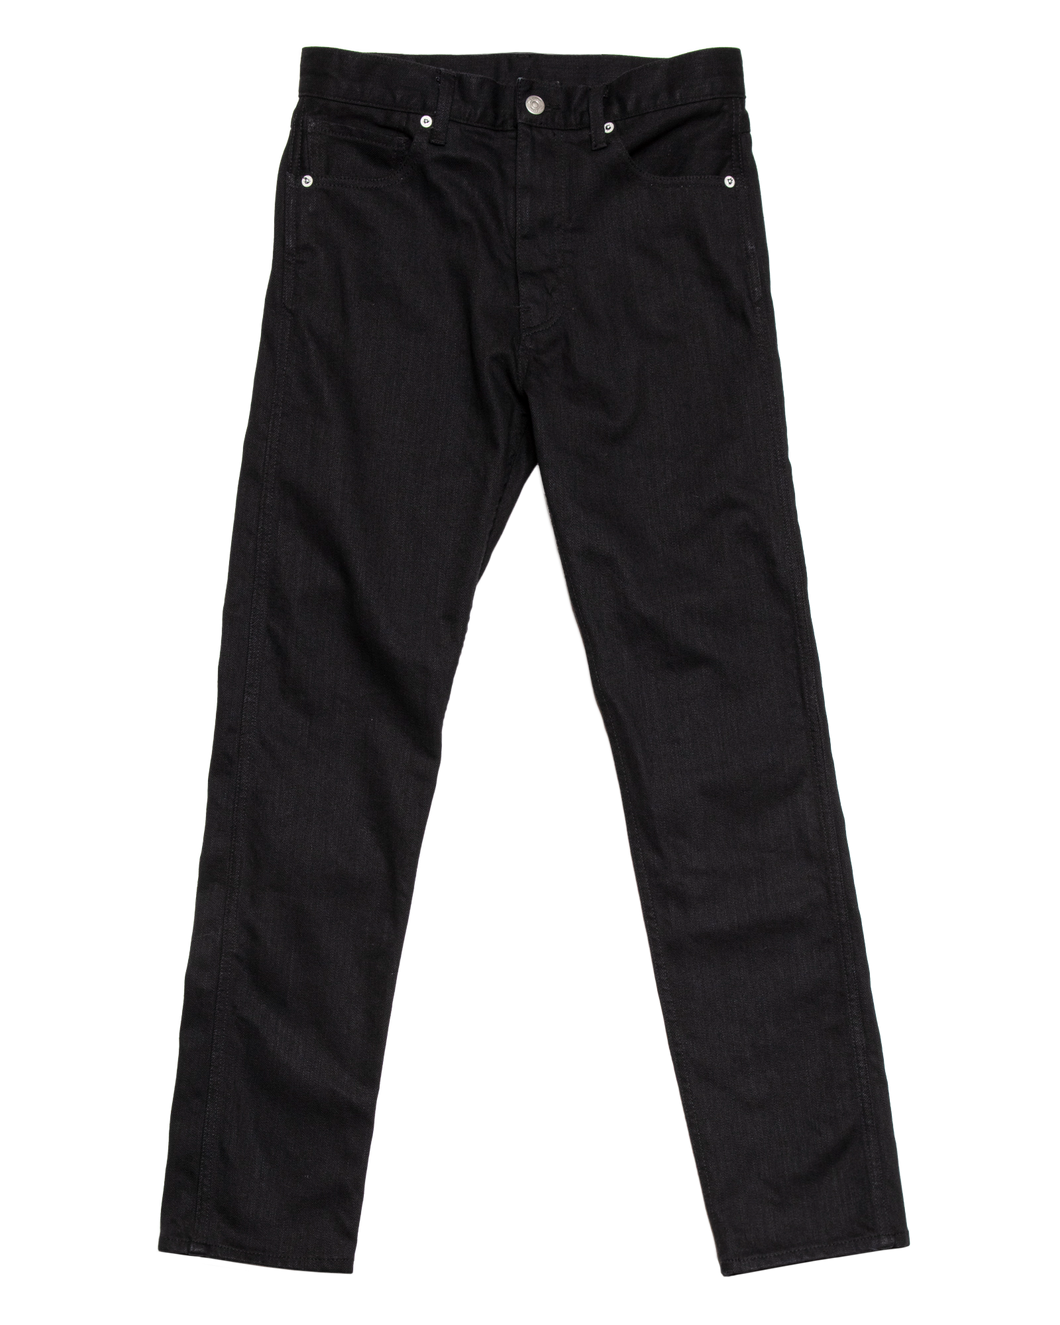 CLASSIC 5 POCKET TAPERED PANTS -WASHED STRETCH DENIM-